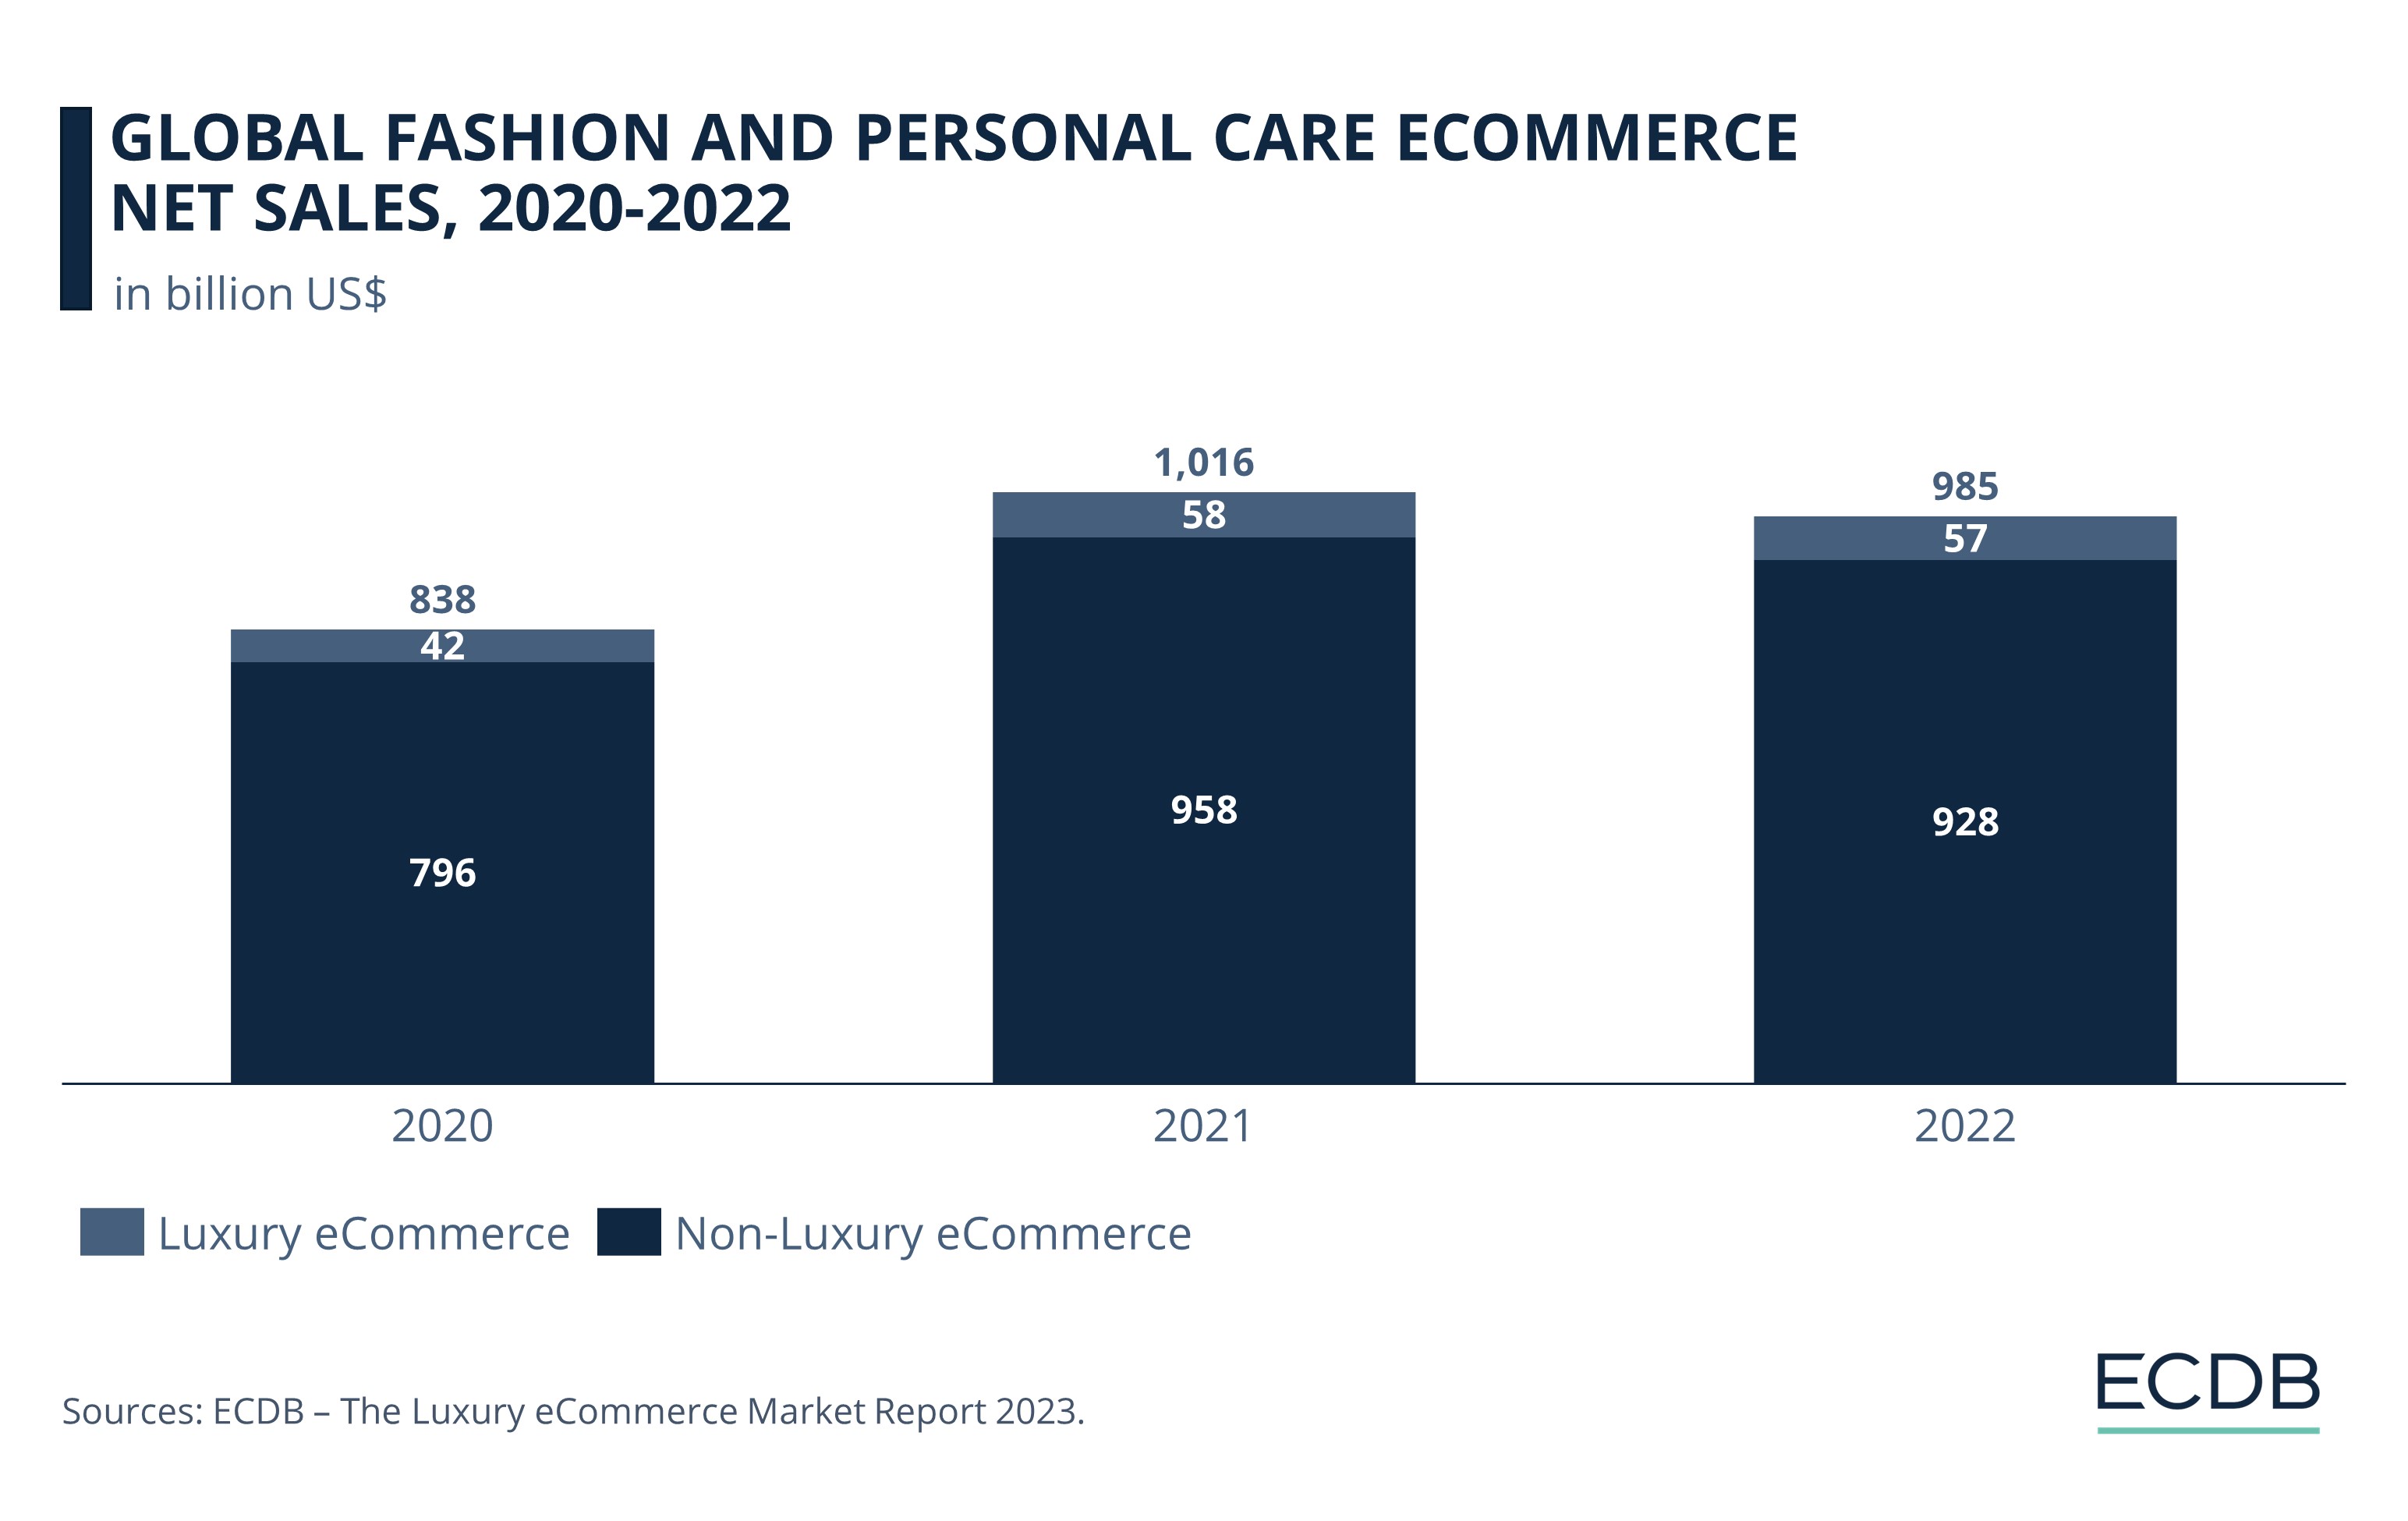 Global Fashion and Personal Care eCommerce Net Sales